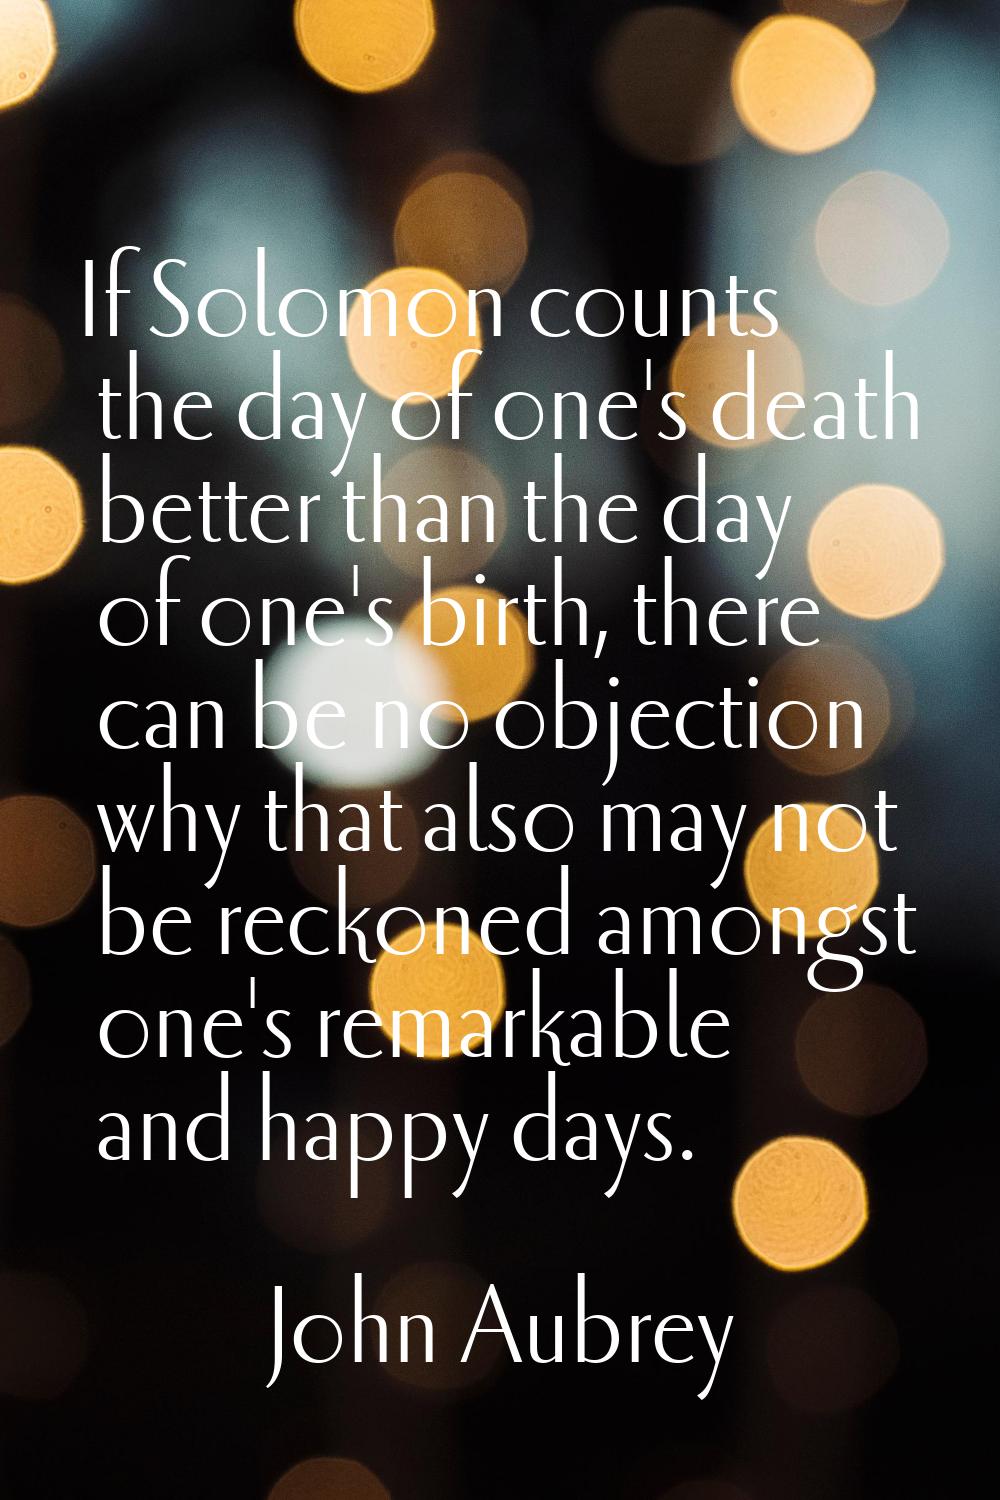 If Solomon counts the day of one's death better than the day of one's birth, there can be no object